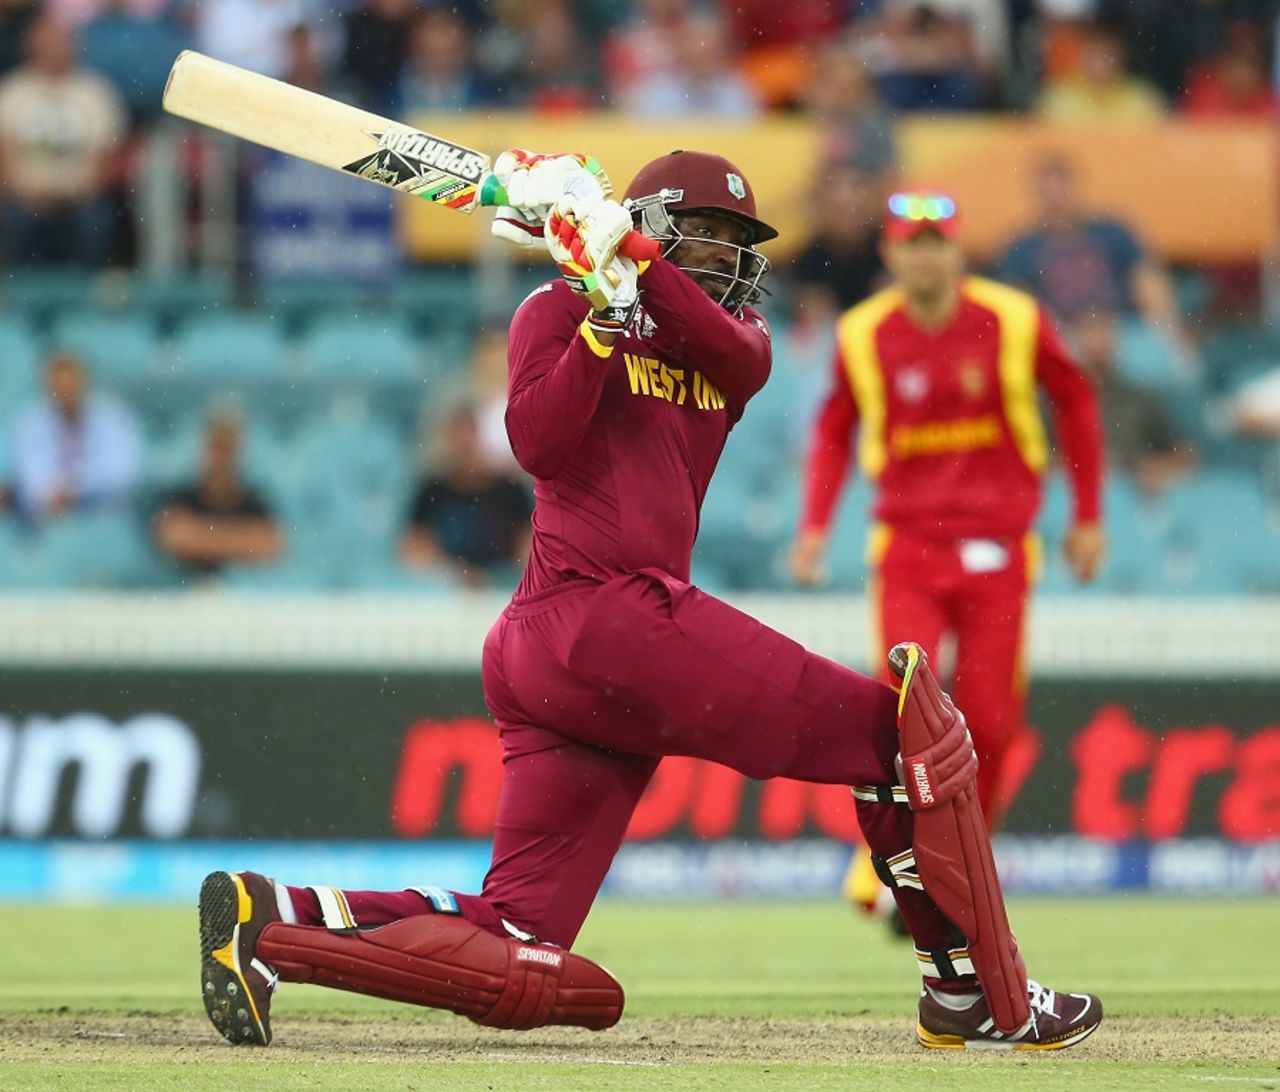 Chris Gayle unleashes a slog sweep, West Indies v Zimbabwe, World Cup 2015, Group B, Canberra, February 24, 2015